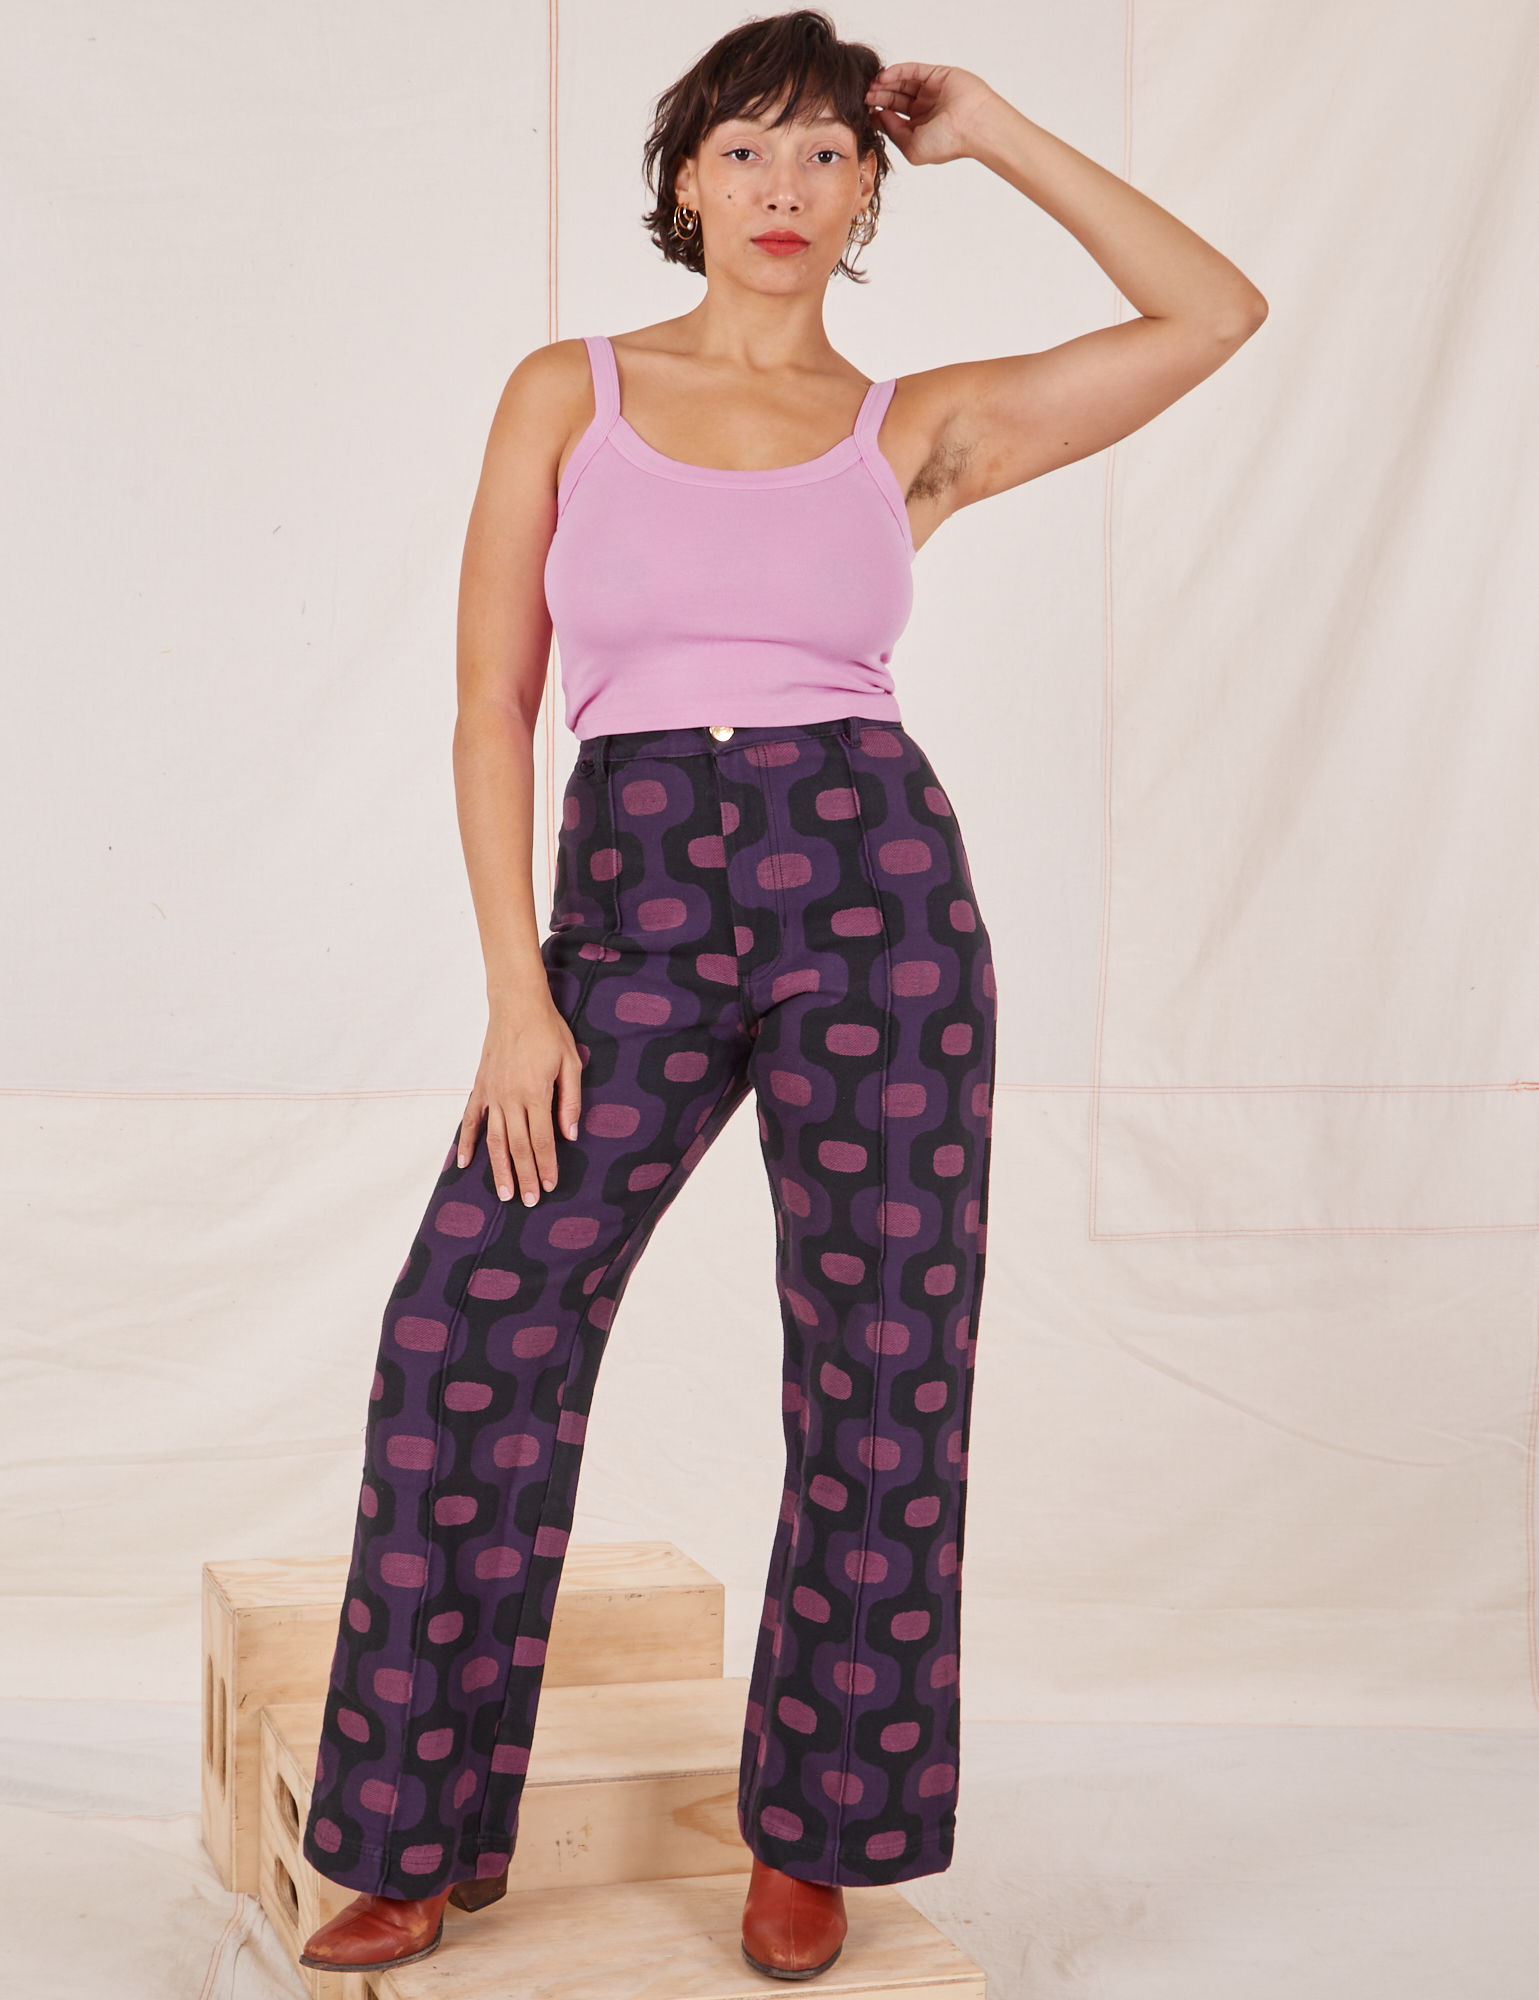 Tiara is 5&#39;4&quot; and wearing S Western Pants in Purple Tile Jacquard paired with bubblegum pink Cami